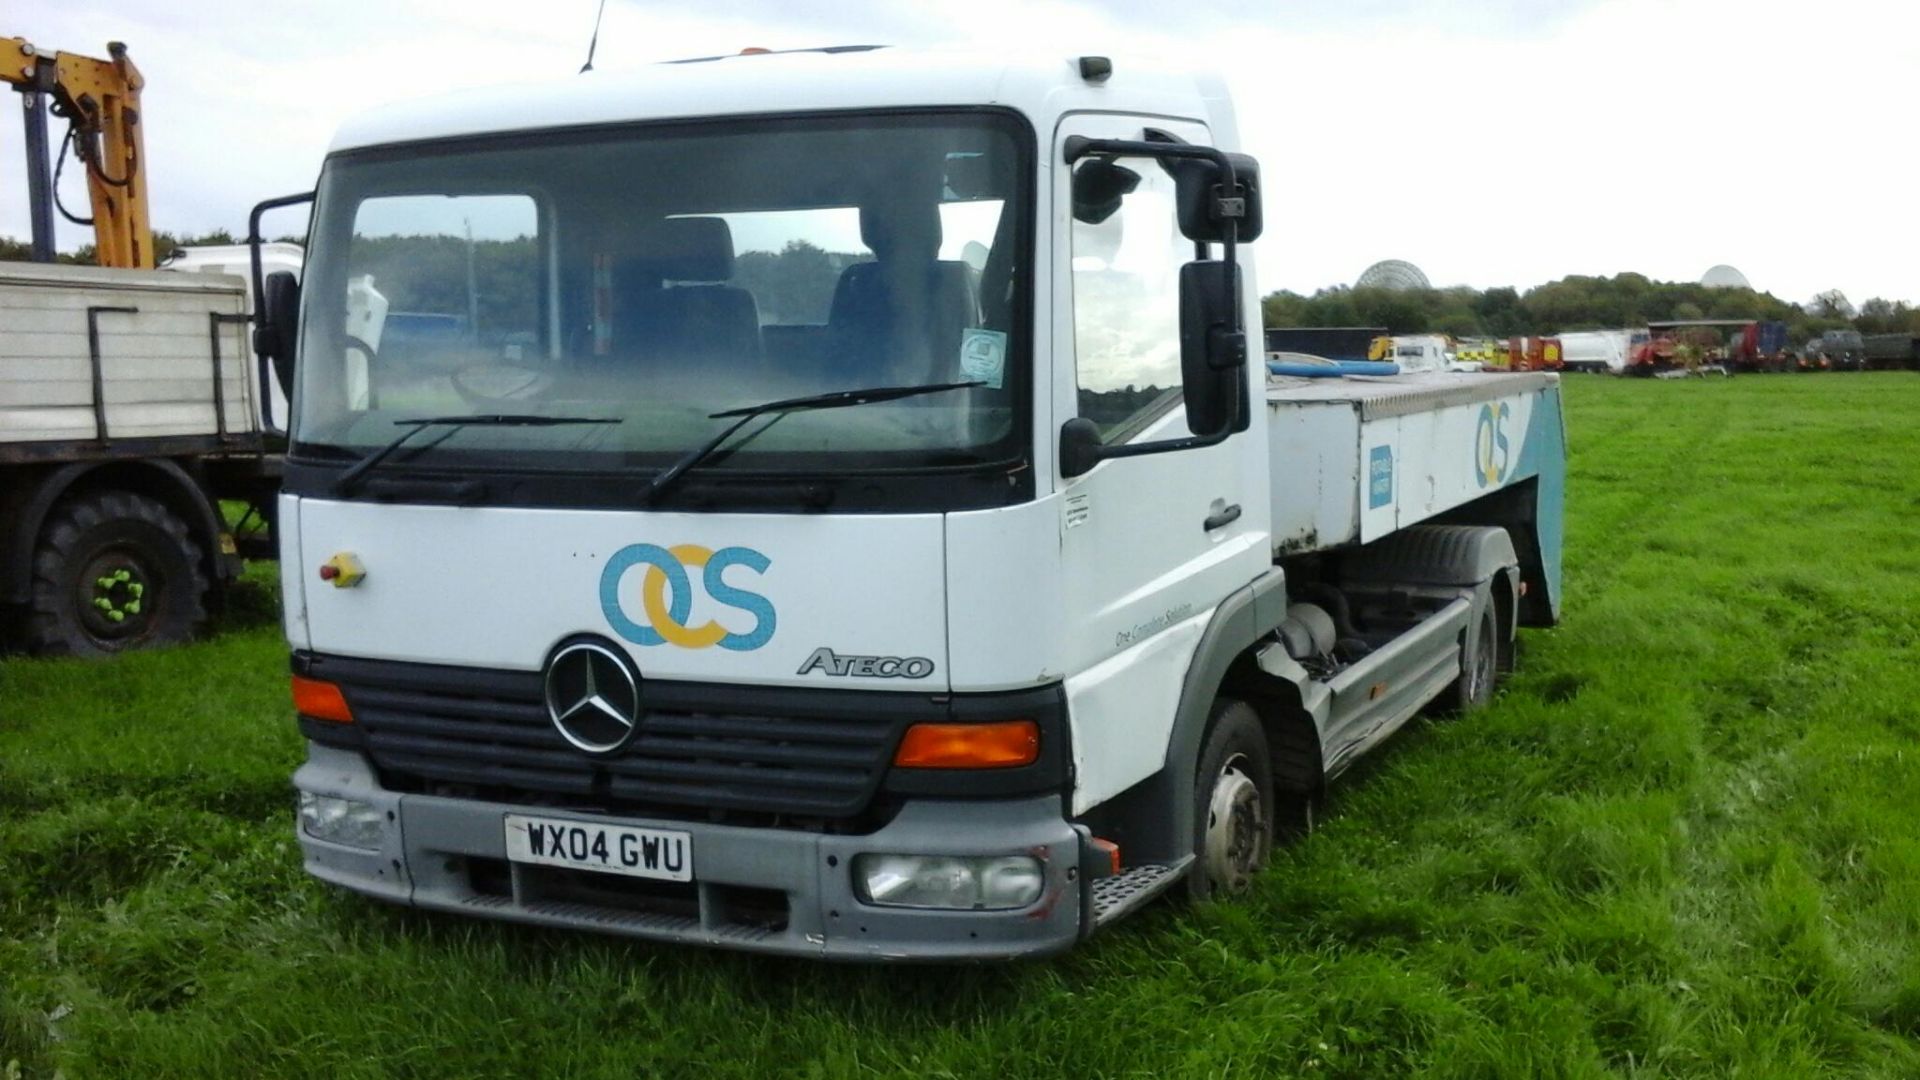 2004/04 REG MERCEDES CVS ATEGO 815 DAY DIESEL WHITE 4X2 AIRCRAFT BOWSER, SHOWING 0 FORMER KEEPERS - Image 2 of 10